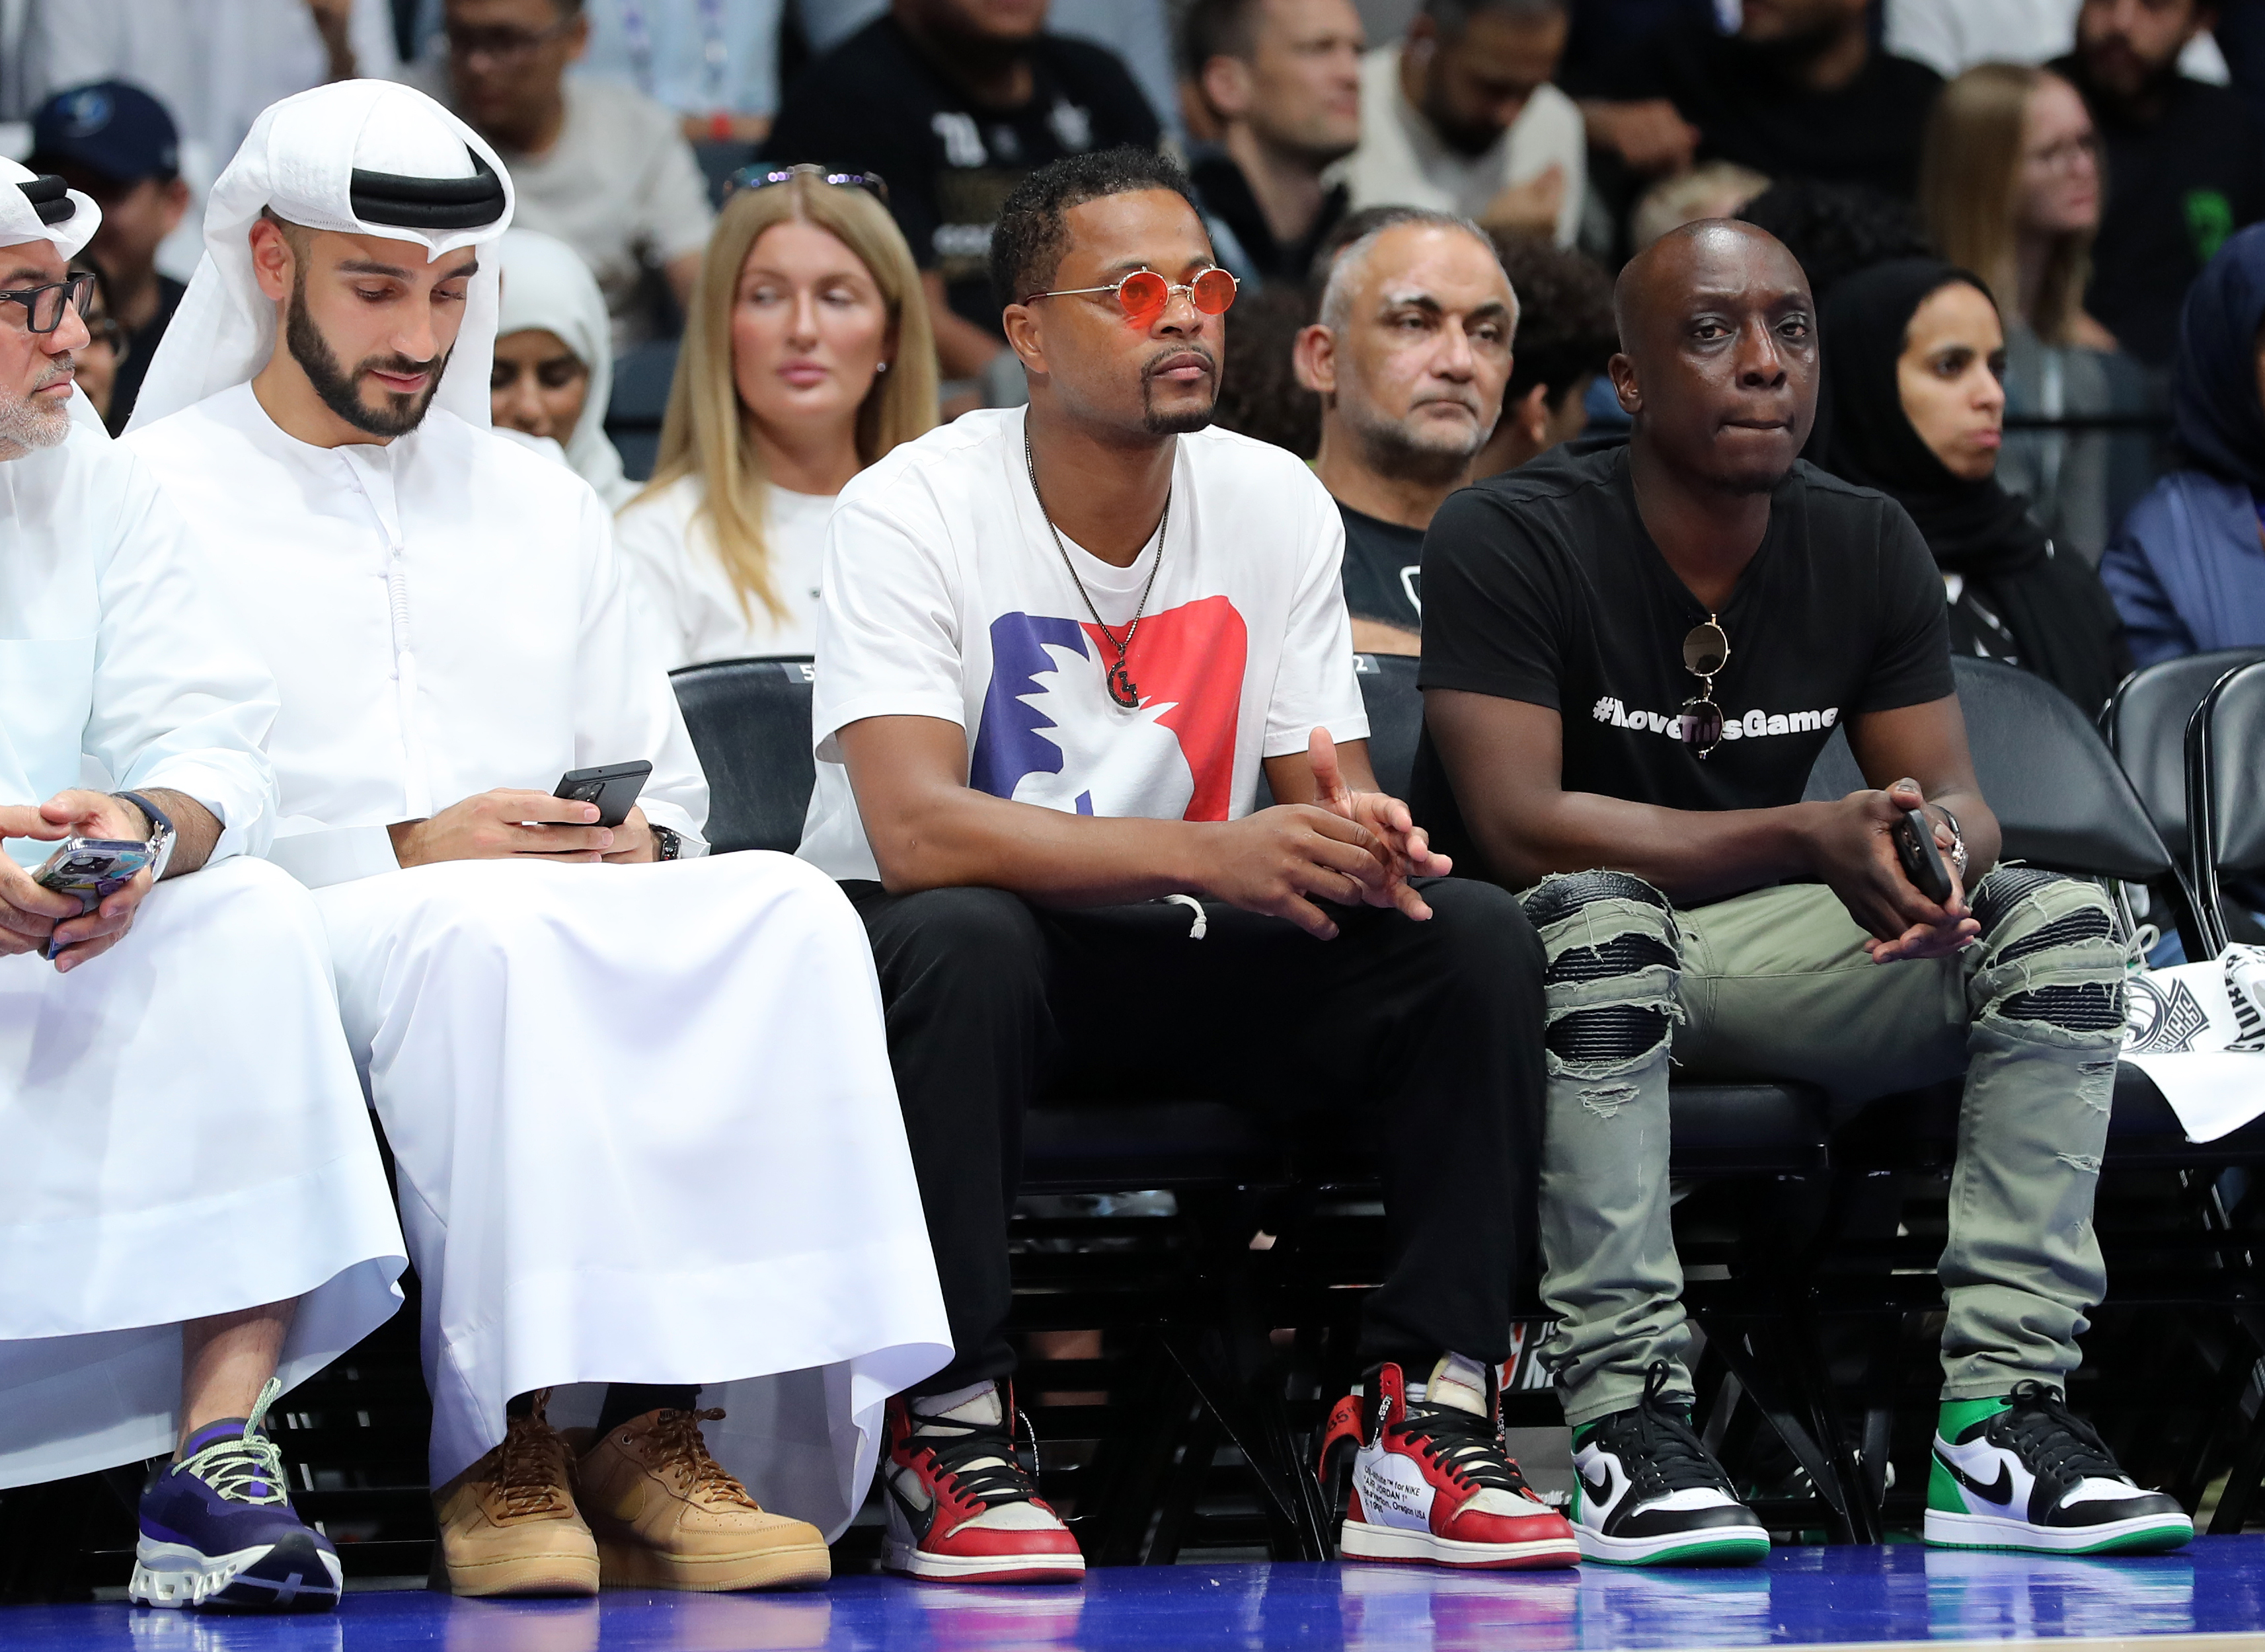 Michael B. Jordan in Abu Dhabi: From Ranveer Singh To Maya Diab, Here's A  List of All The Celebs Who Attended The NBA Tournament at Etihad Stadium